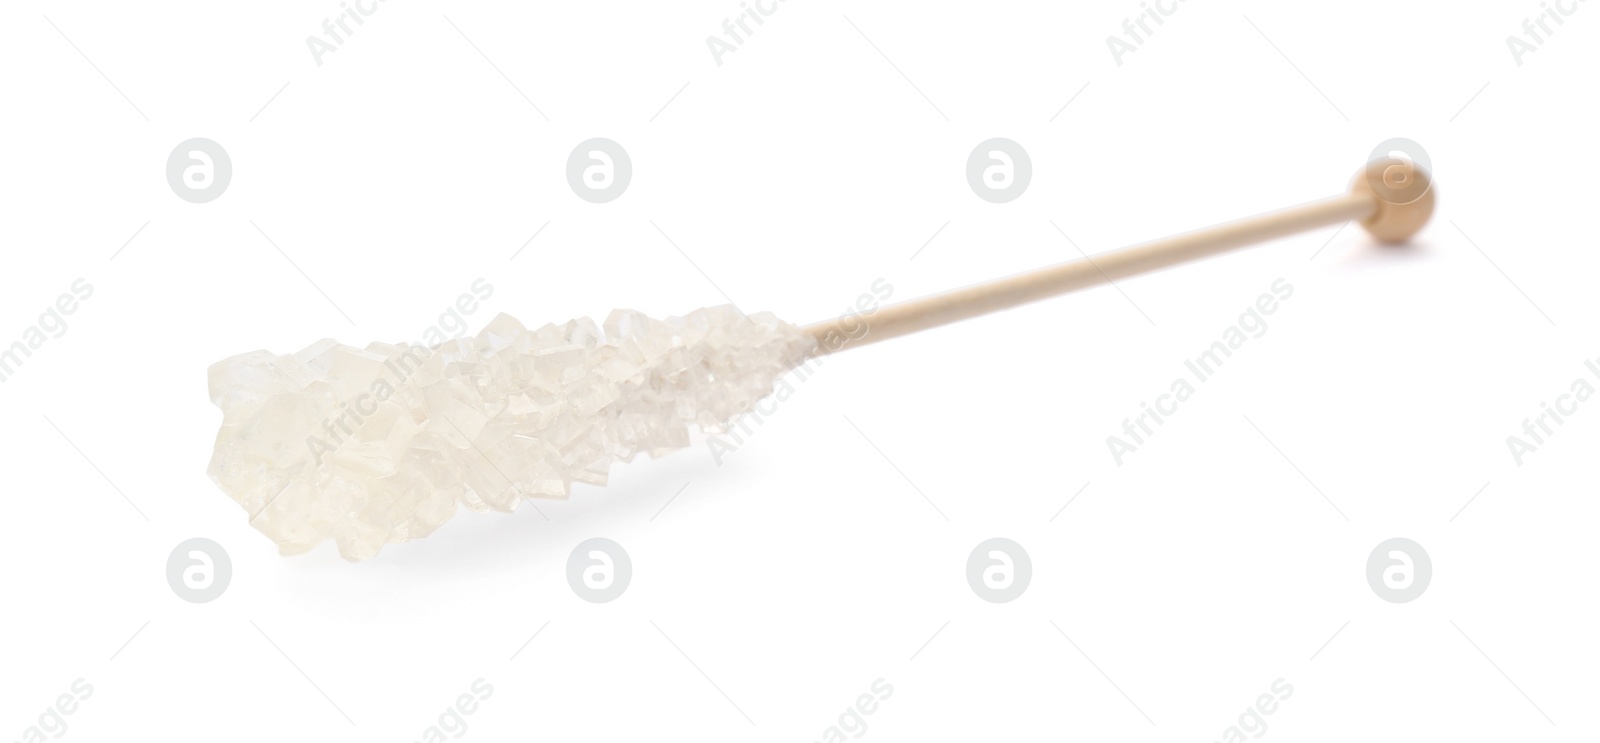 Photo of Wooden stick with sugar crystals isolated on white. Tasty rock candy